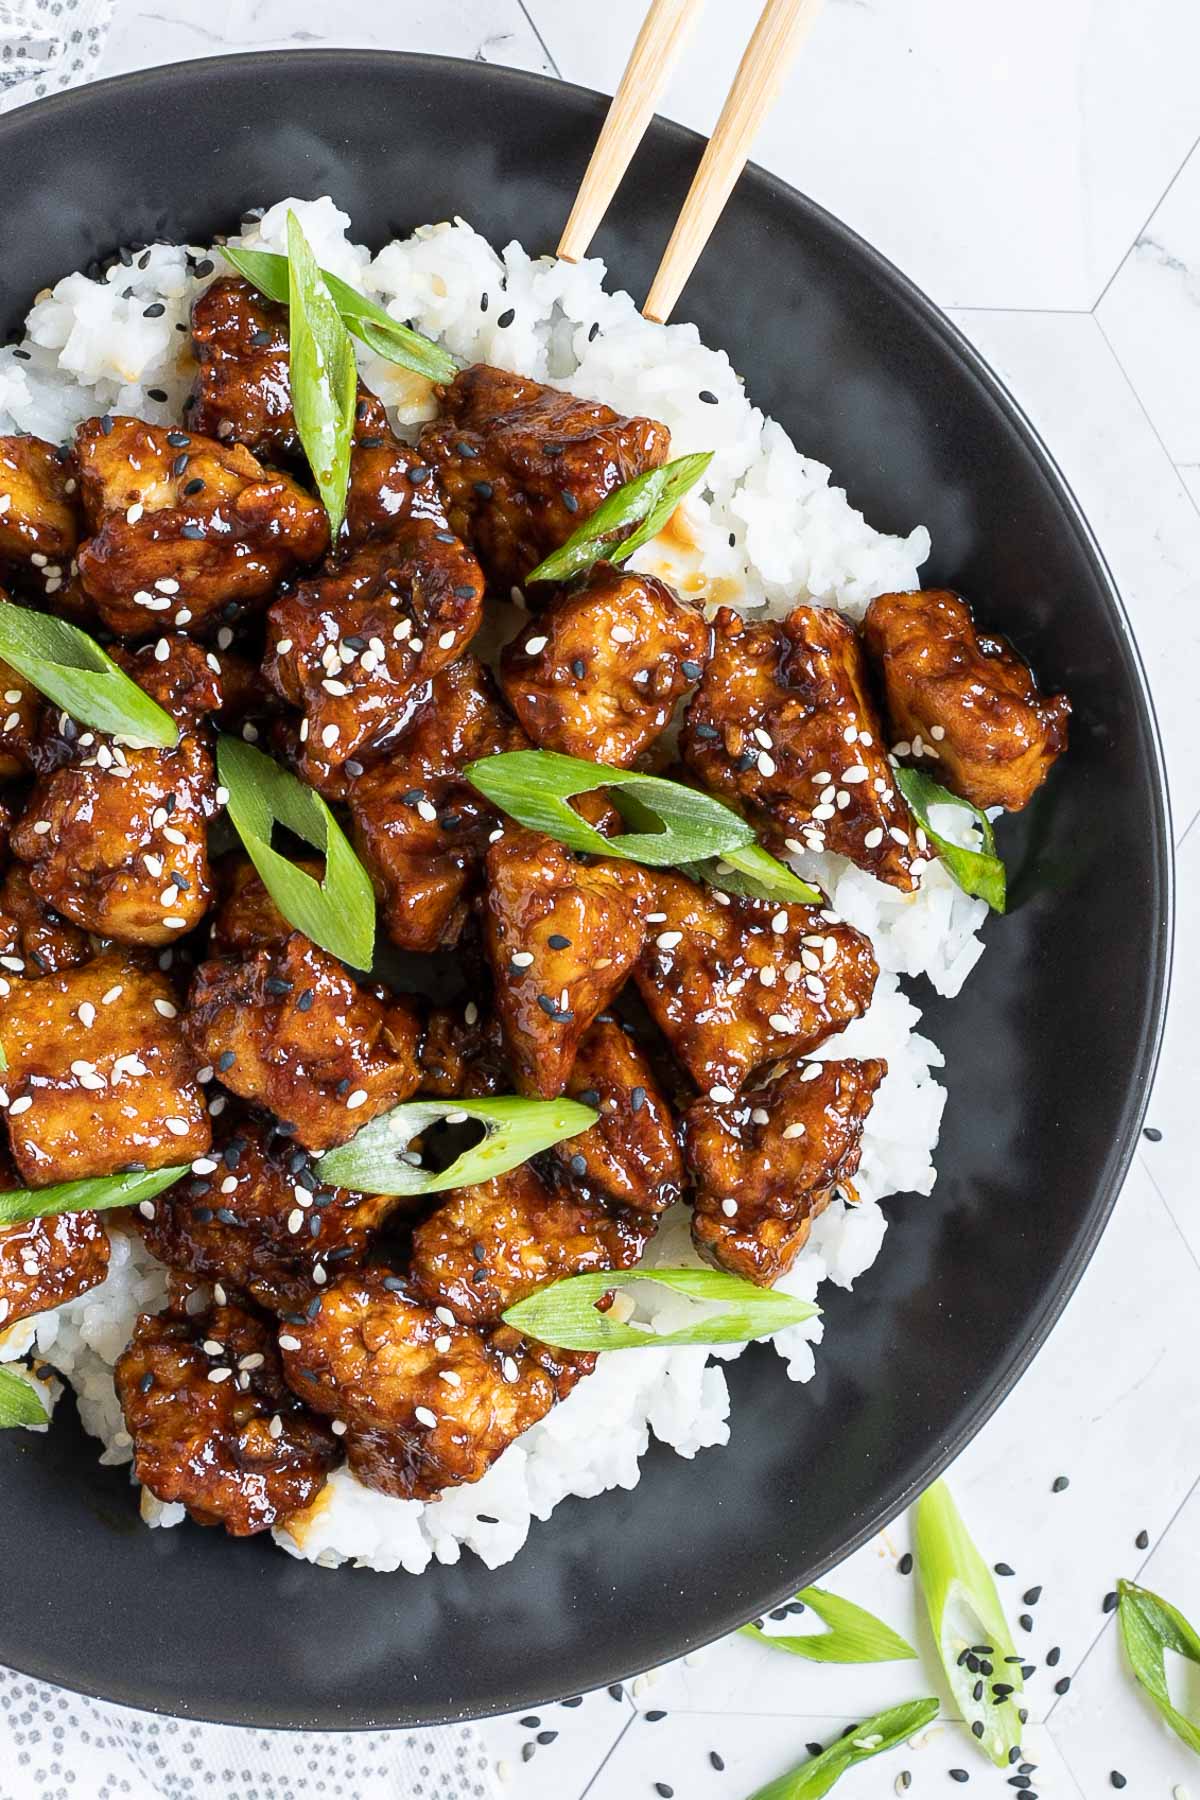 Brown sticky tofu pieces served on top of white rice on a black plate. It is sprinkled with black and white sesame seeds and scallion.